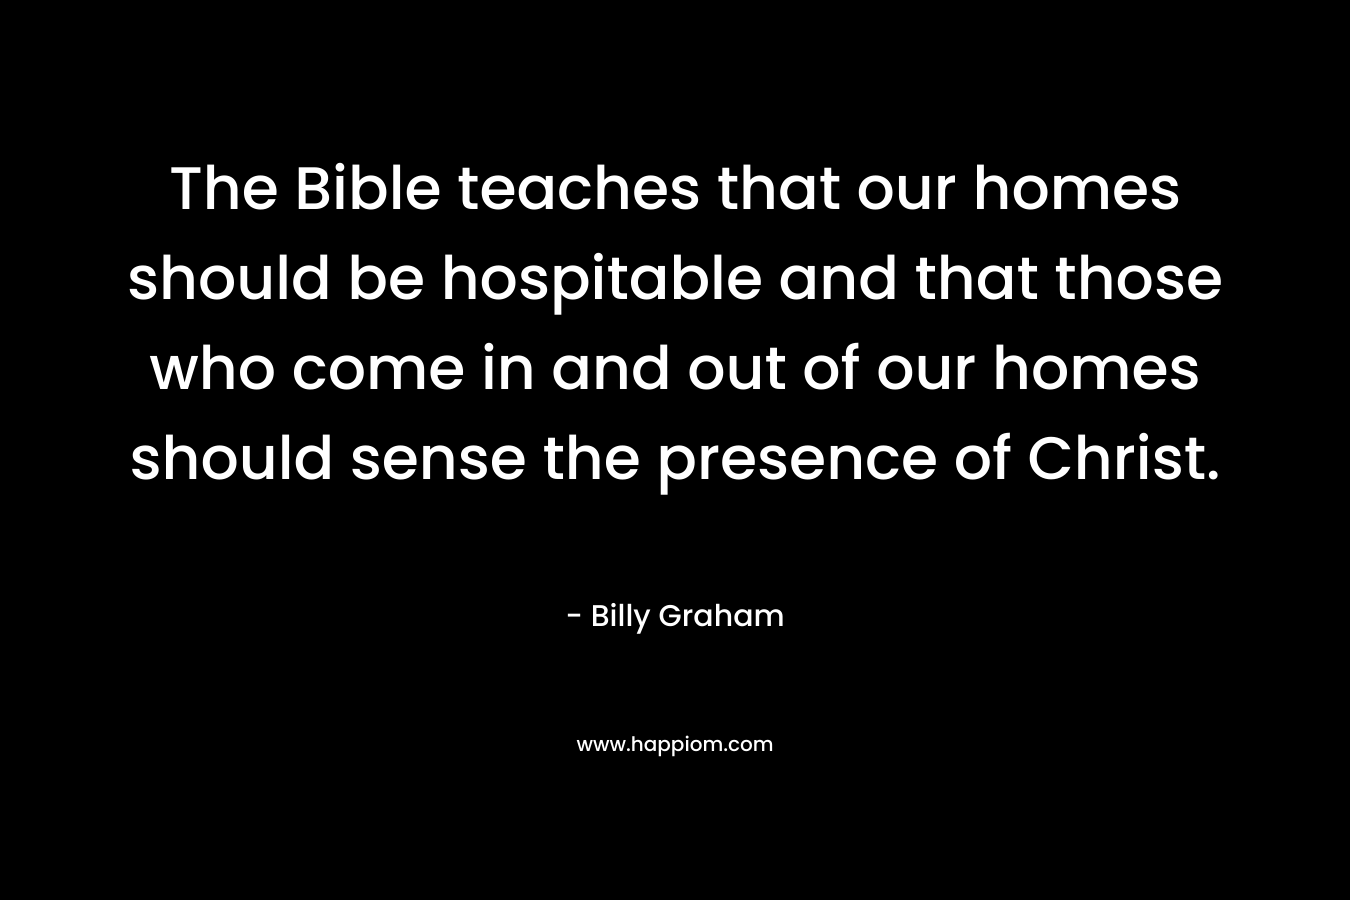 The Bible teaches that our homes should be hospitable and that those who come in and out of our homes should sense the presence of Christ.